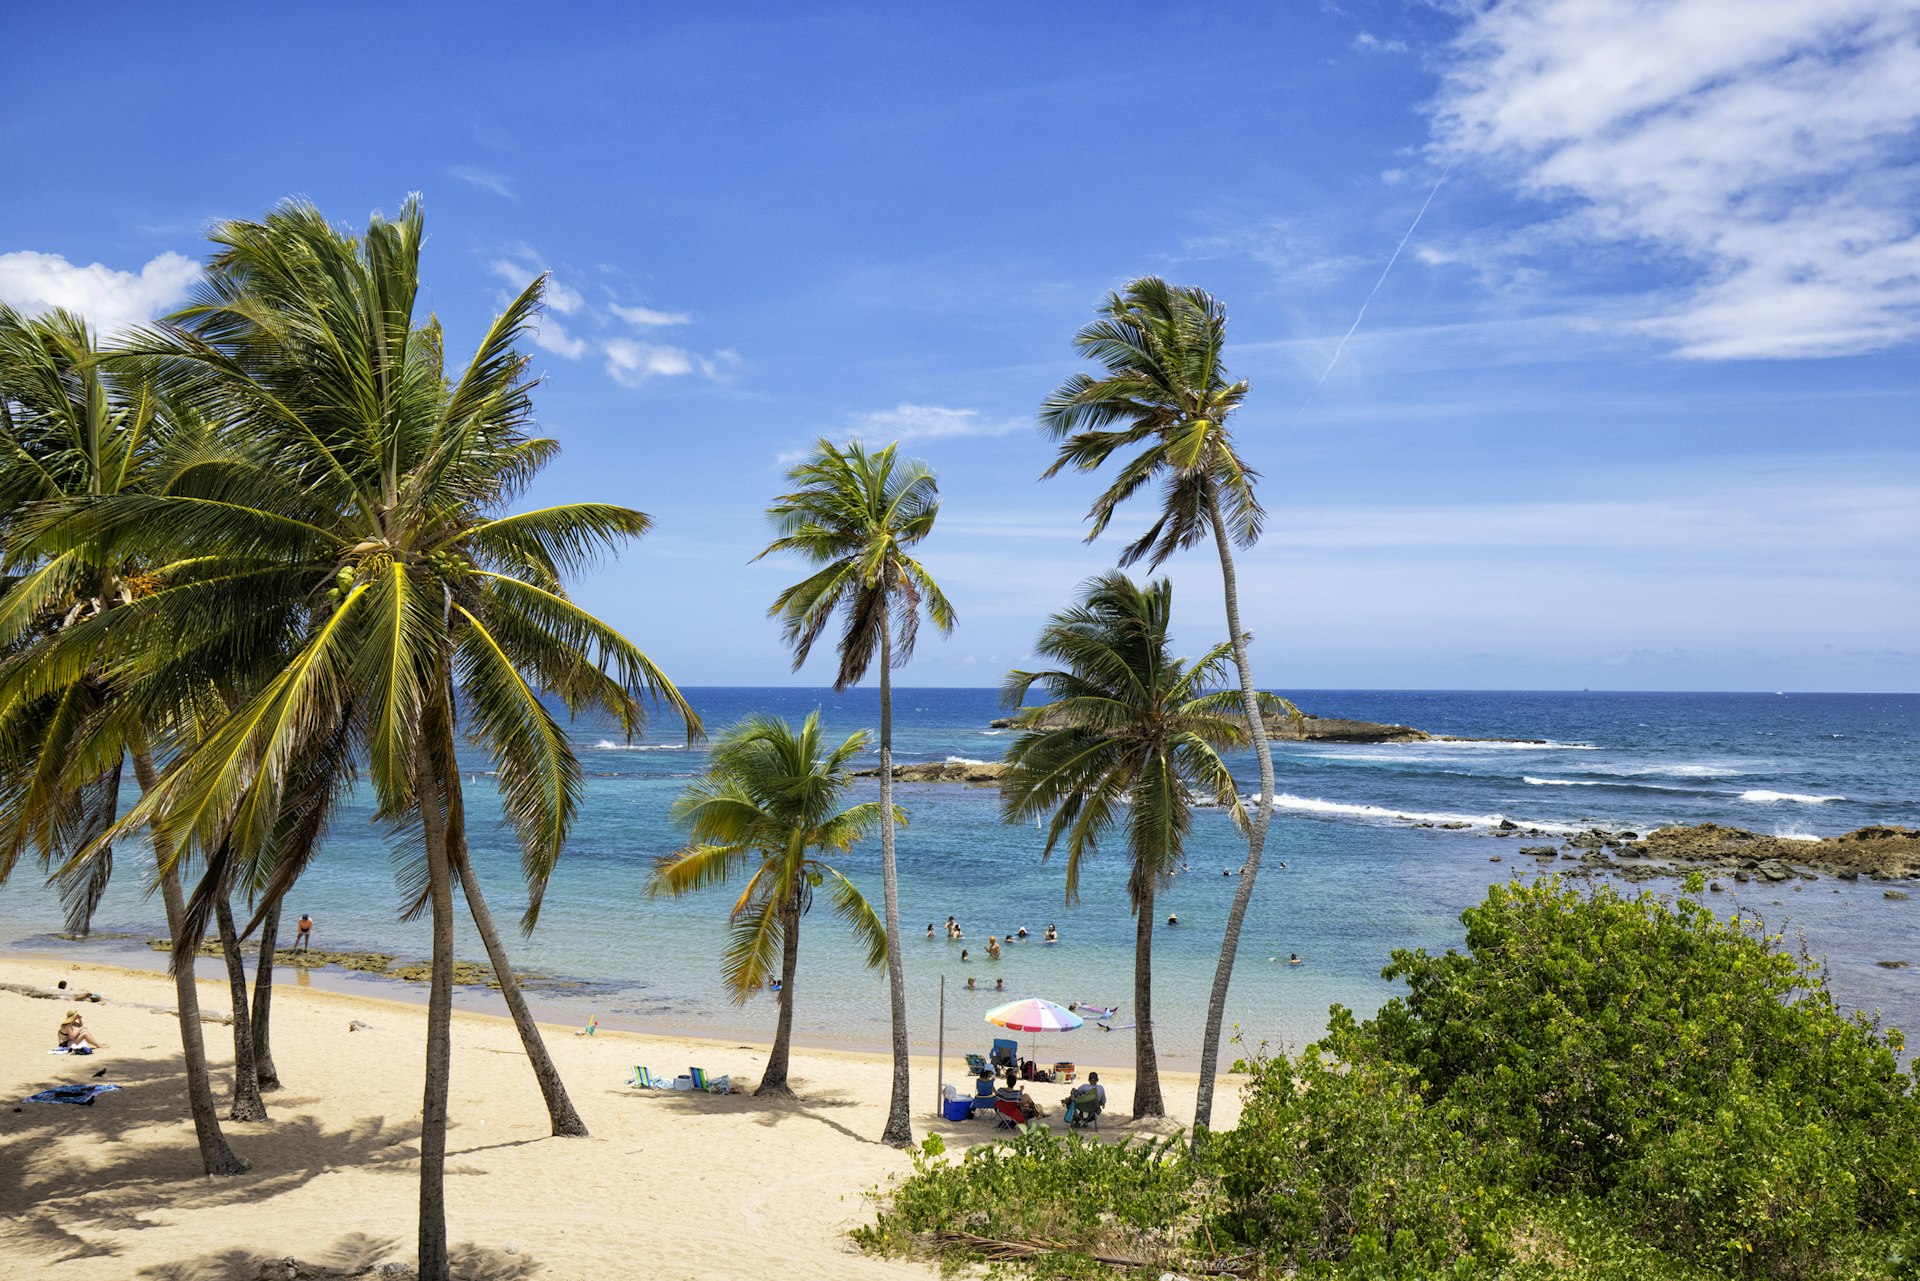 People relax on the sandy shores of a palm-tree-lined beach